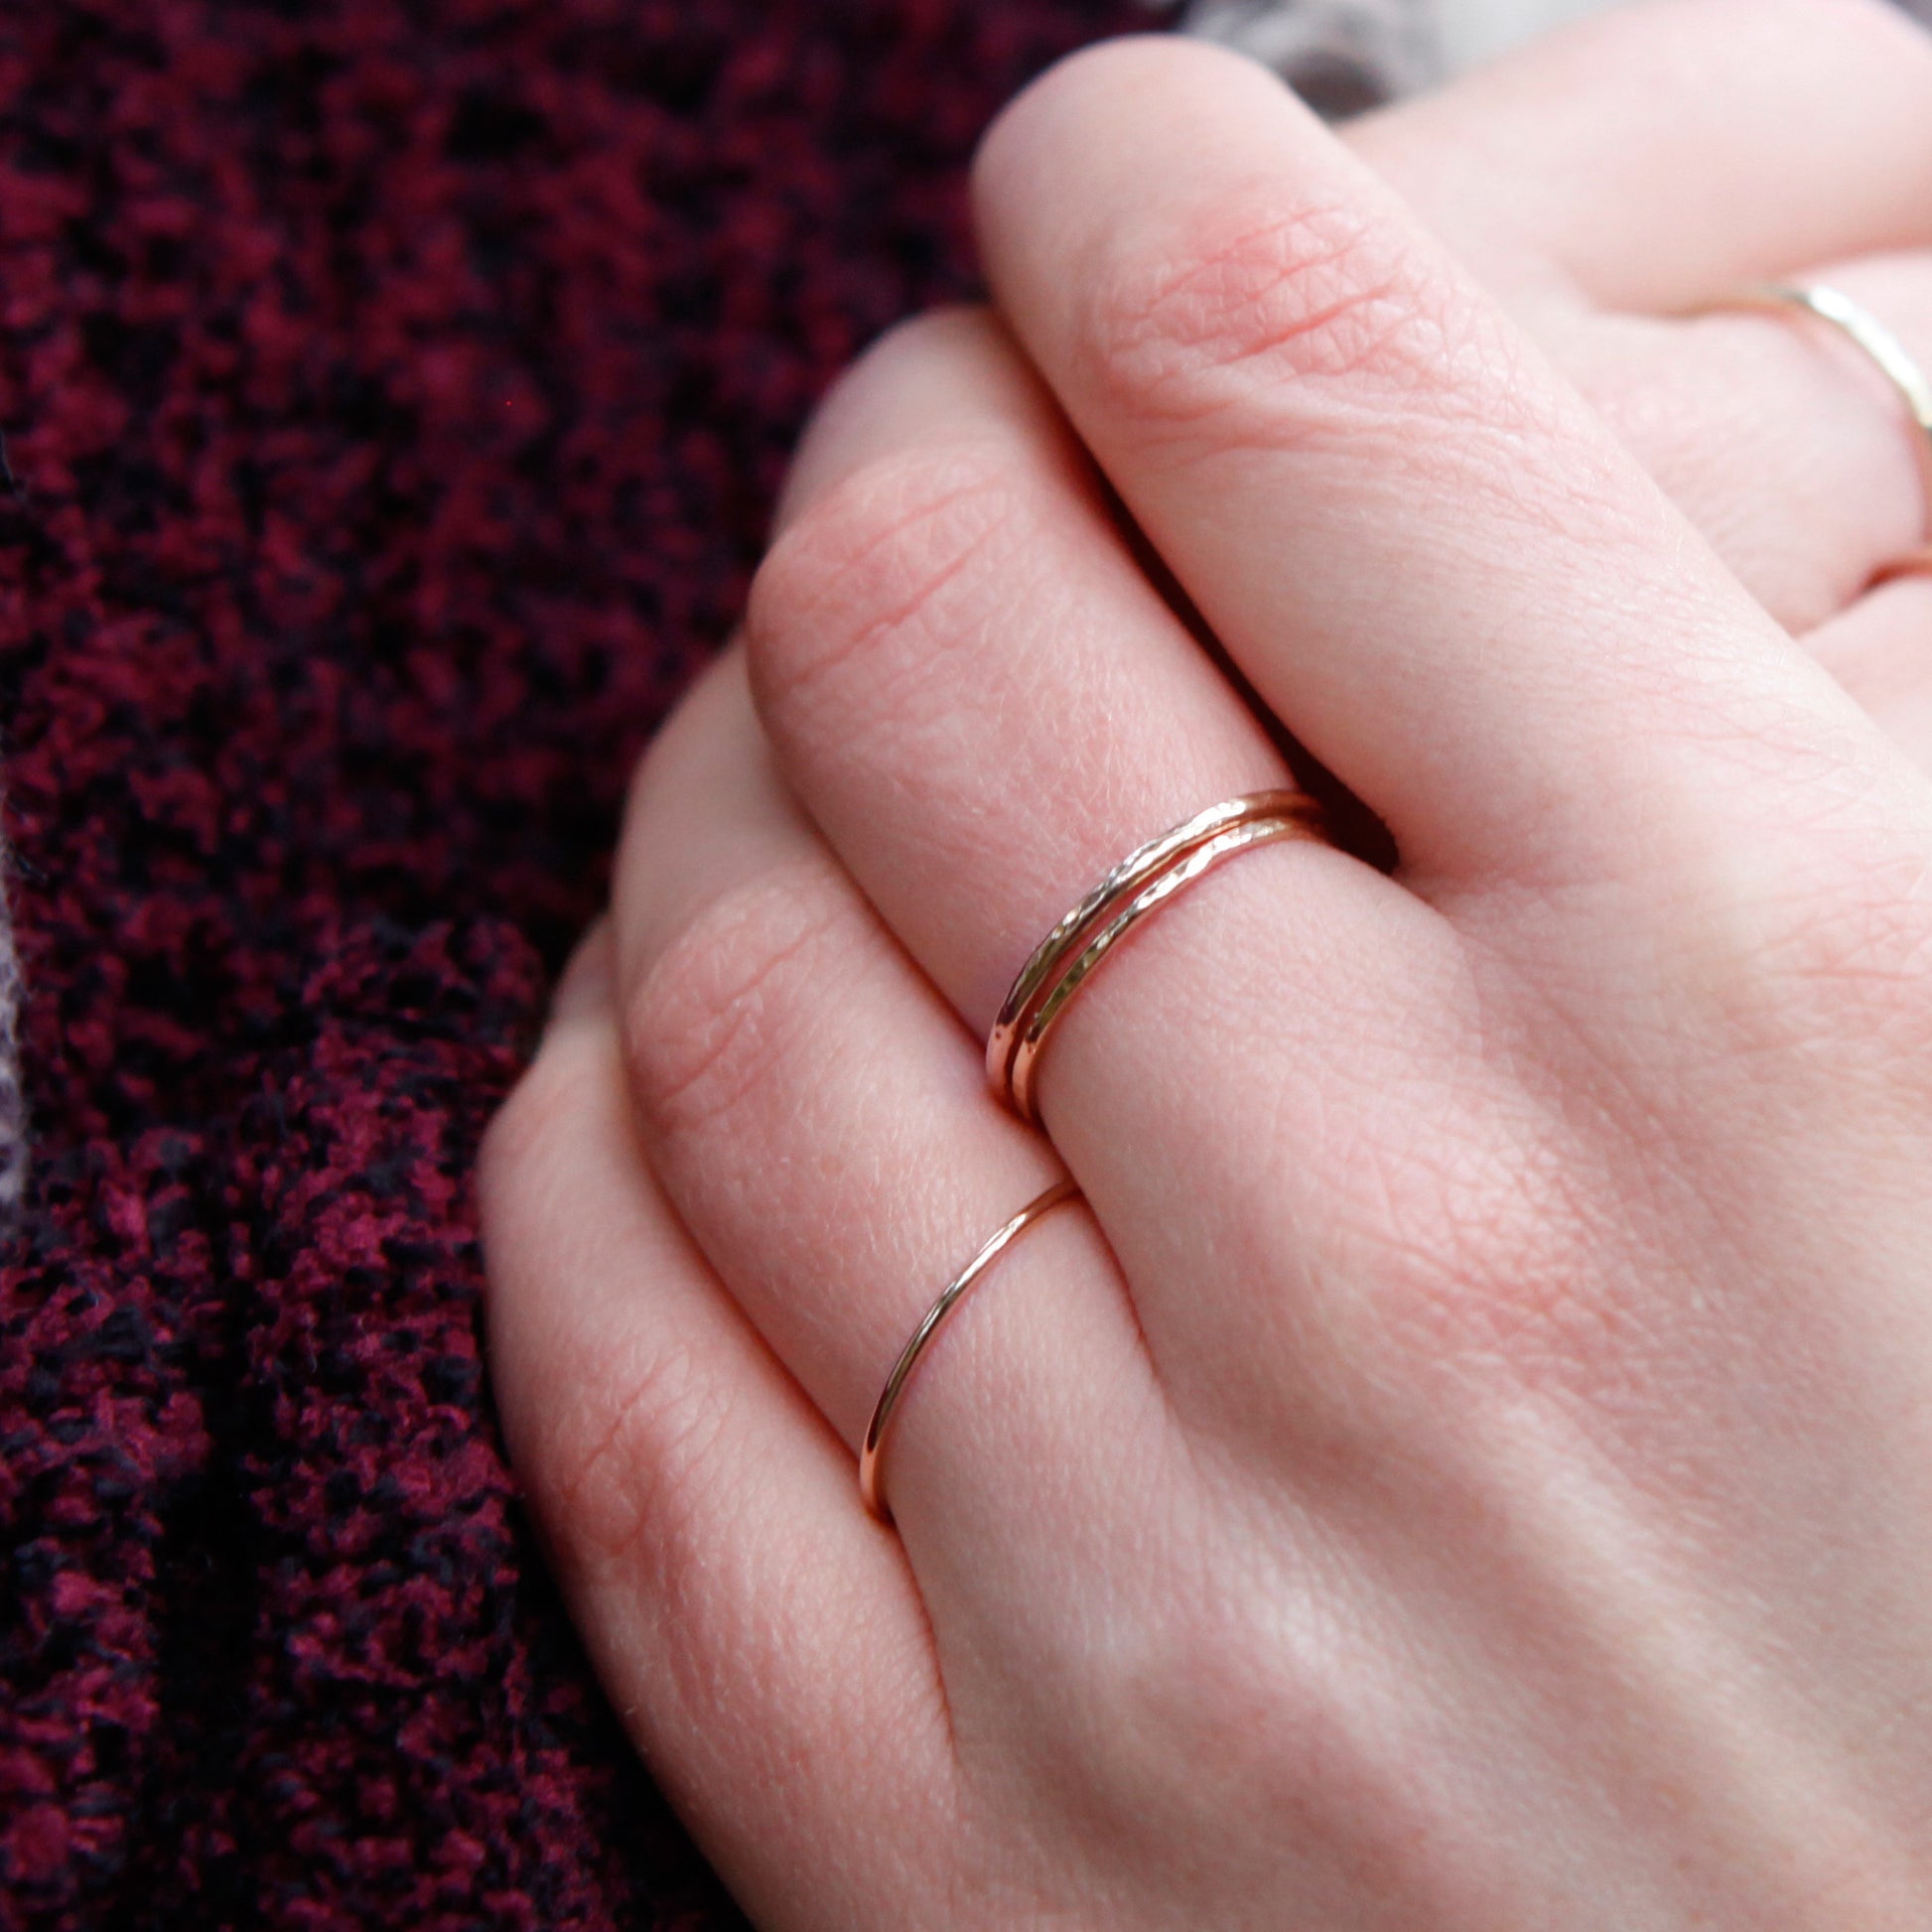 A close up of a hand wearing skinny rings, two 1mm and one 1.2mm, in 9ct gold